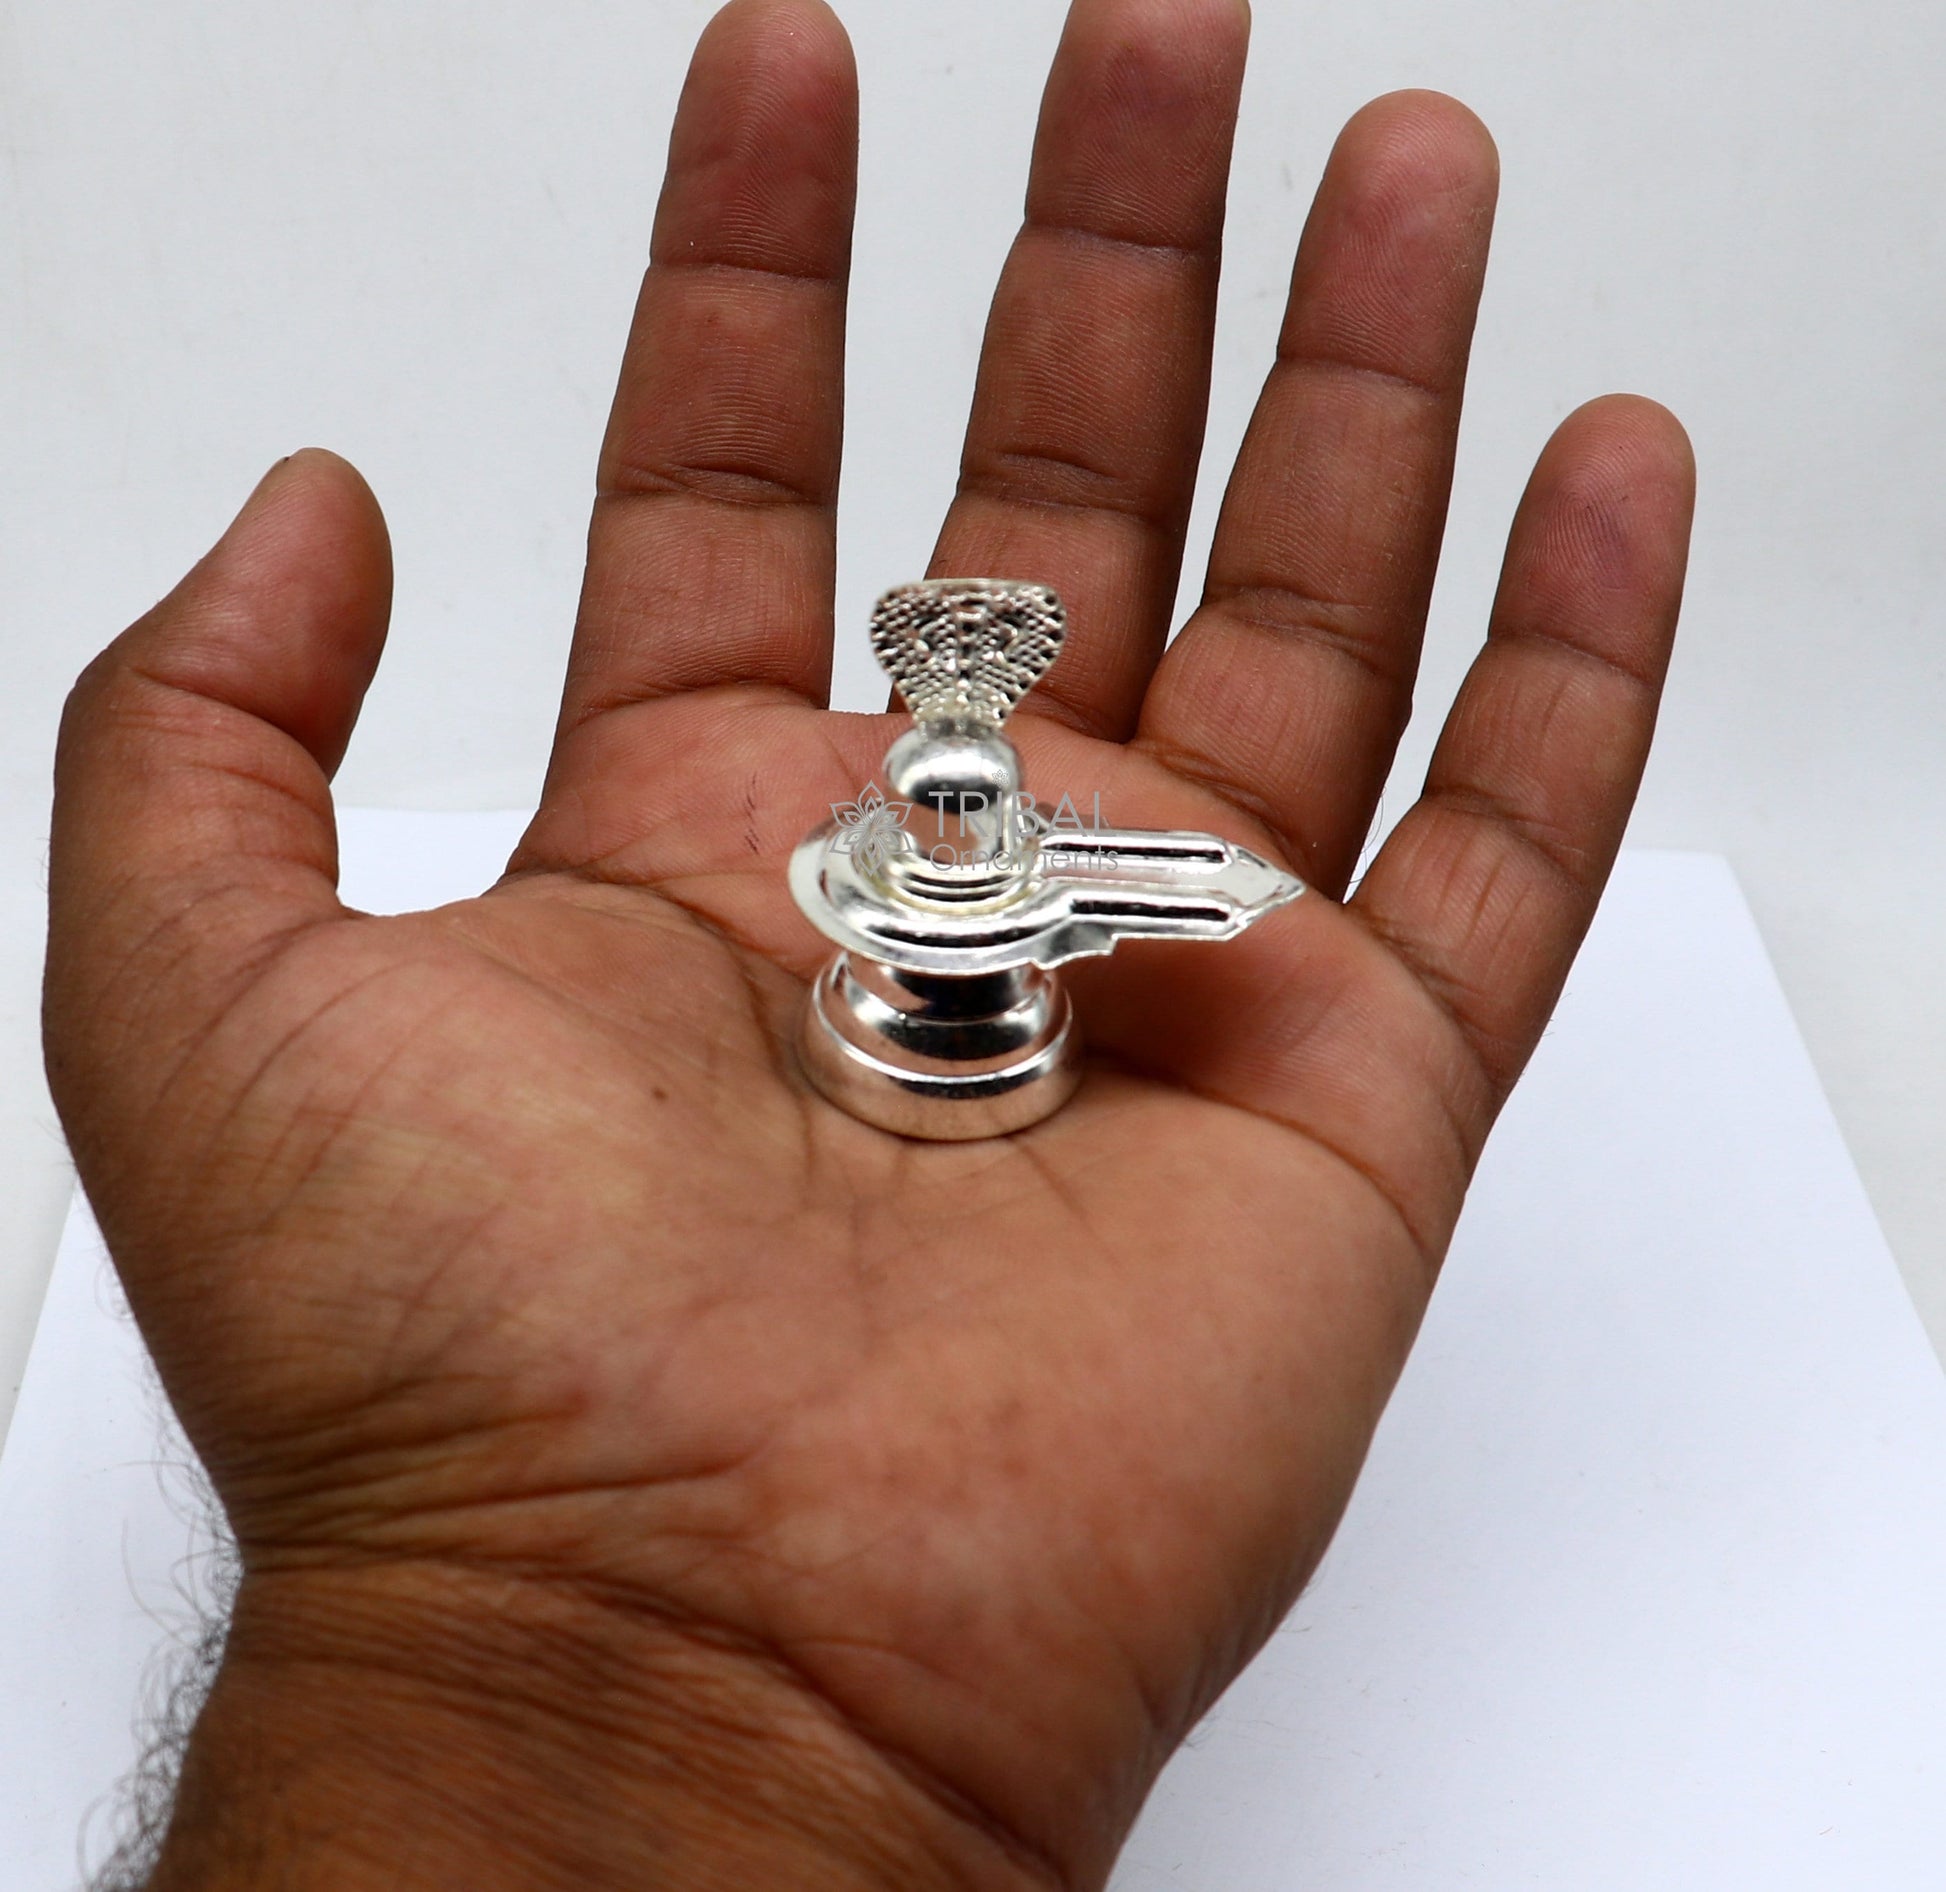 925 sterling silver handmade small Lord Shiva lingam , silver shivling puja articles, home temple silver article puja accessories art676 - TRIBAL ORNAMENTS